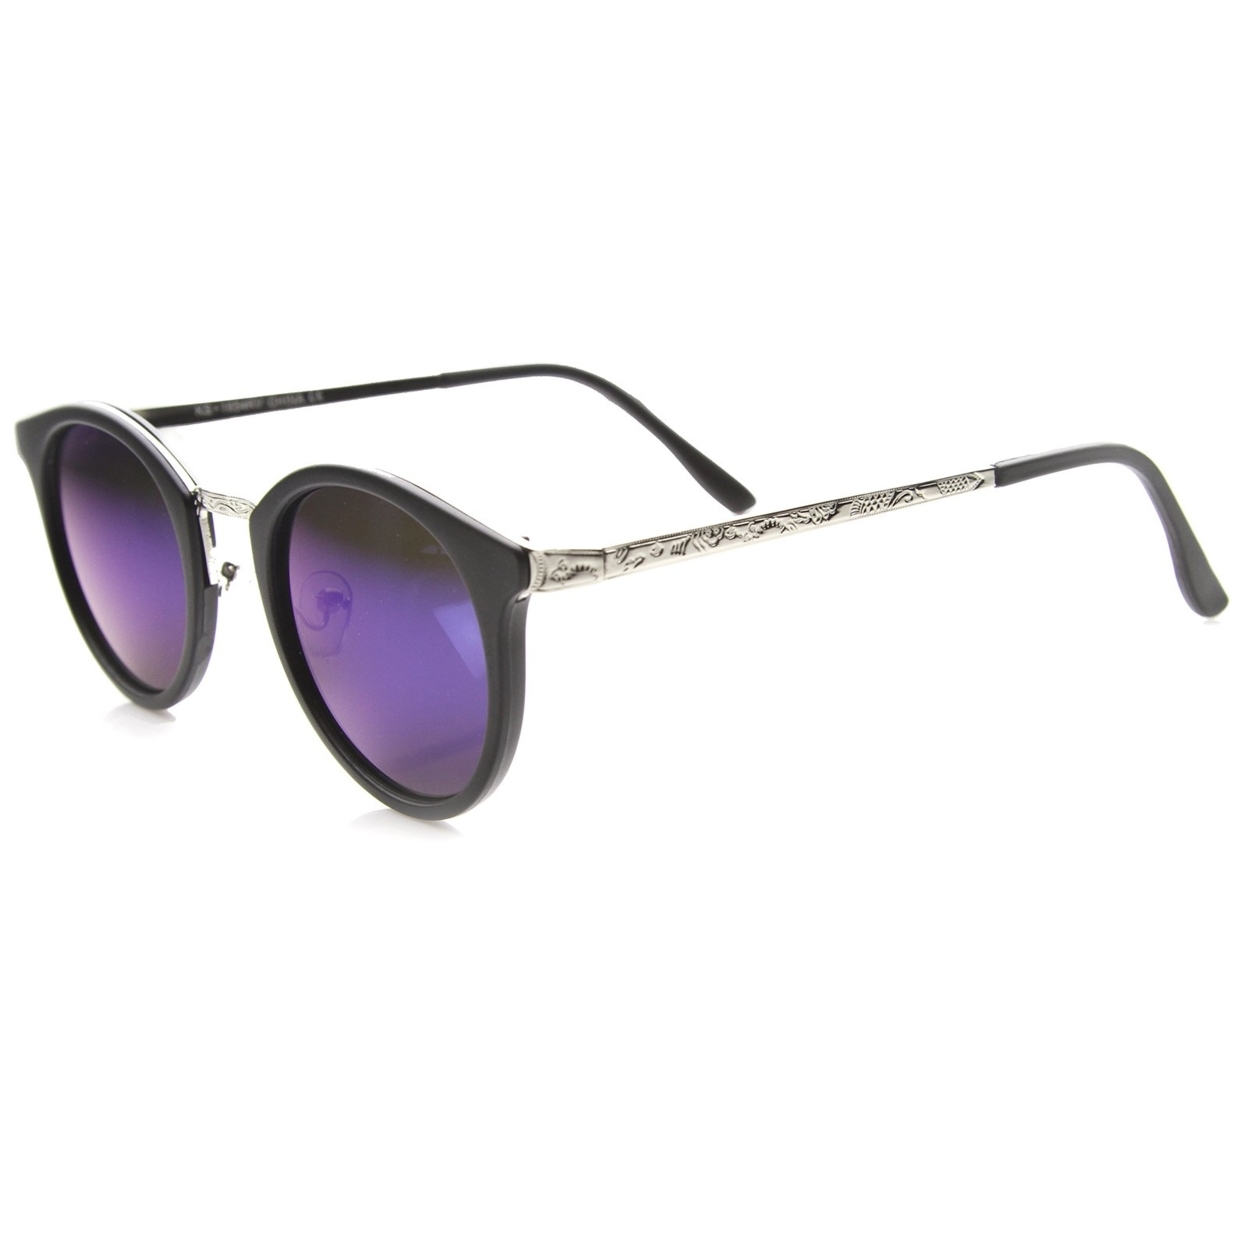 Horn Rimmed Sunglasses With UV400 Protected Mirrored Lens - Matte Black-Silver / Ice